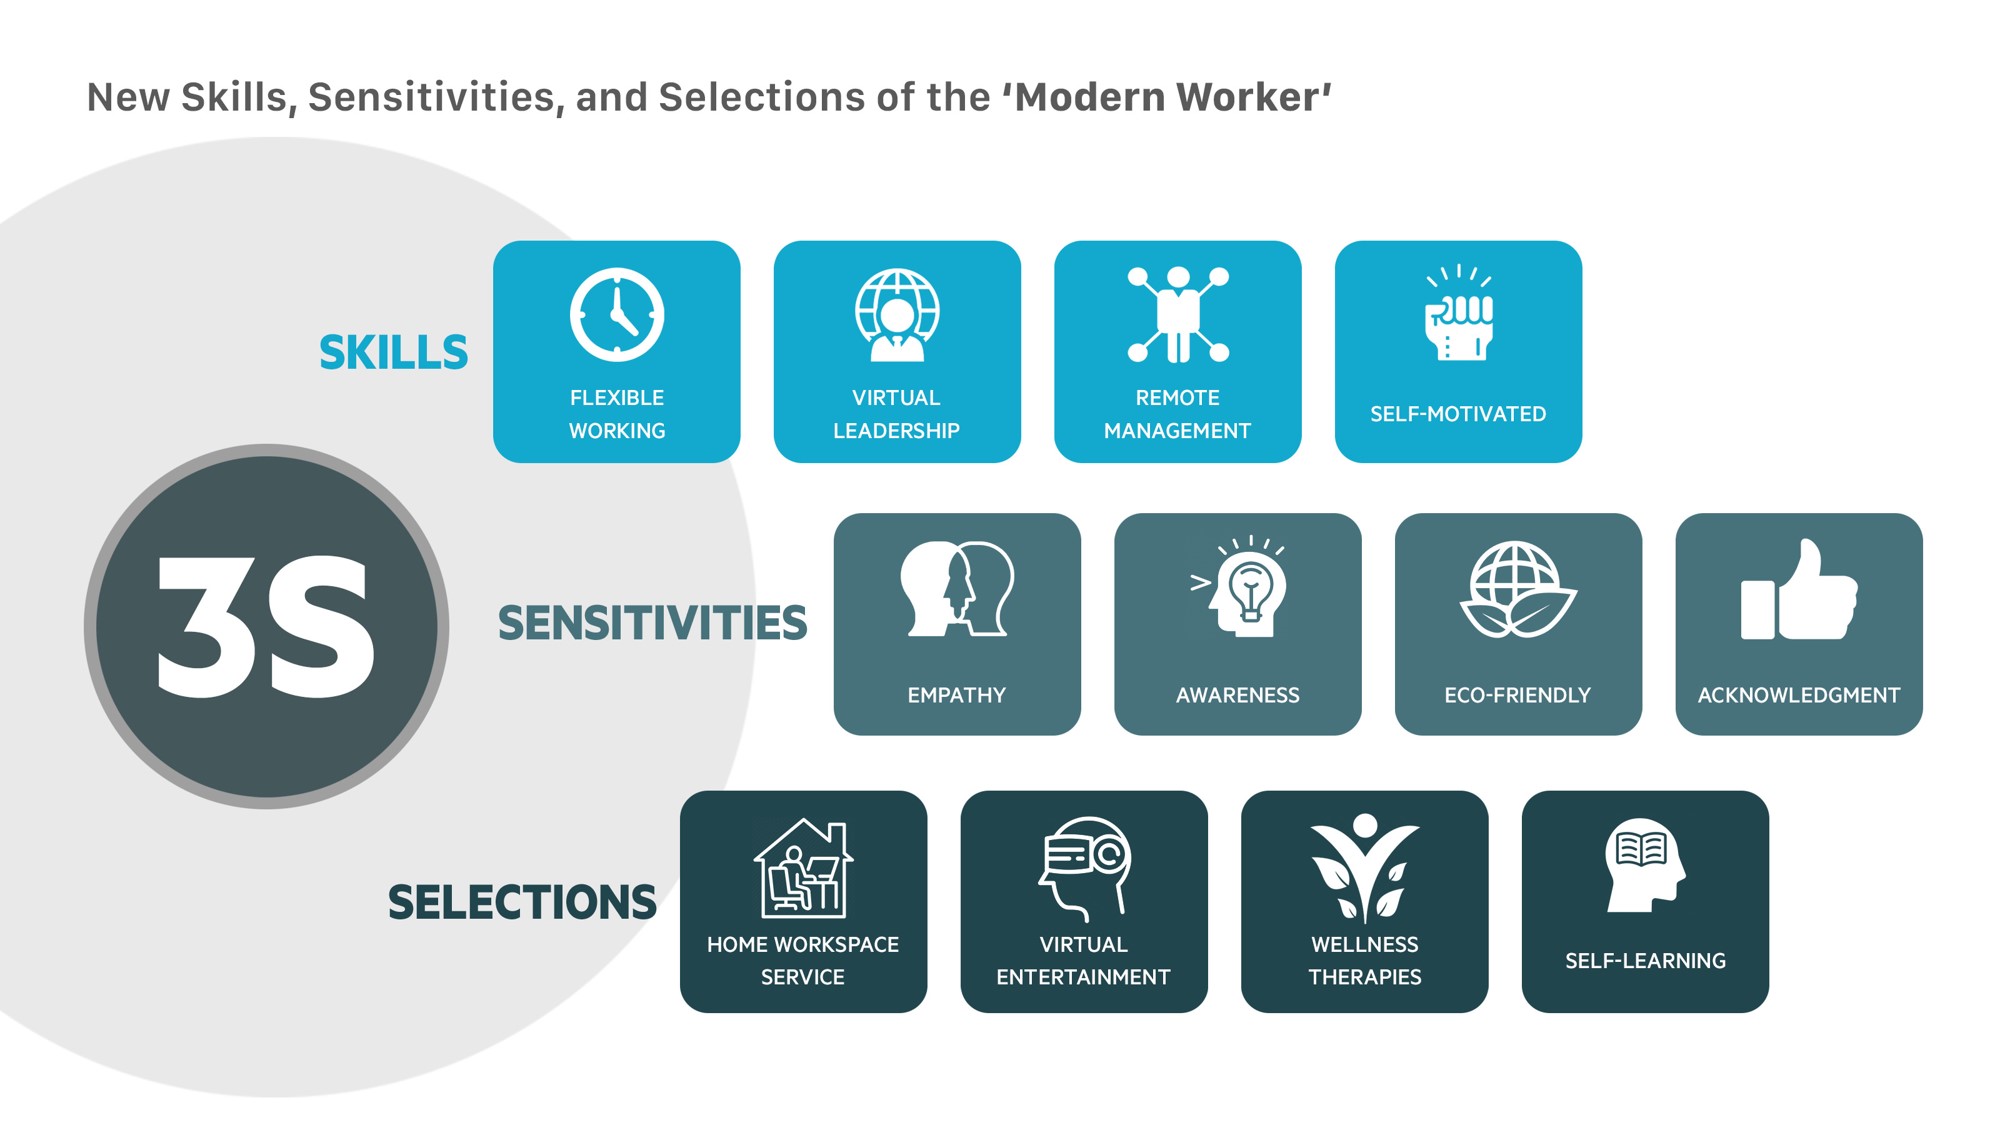 New skills, sensitivities and selections of the Morden worker